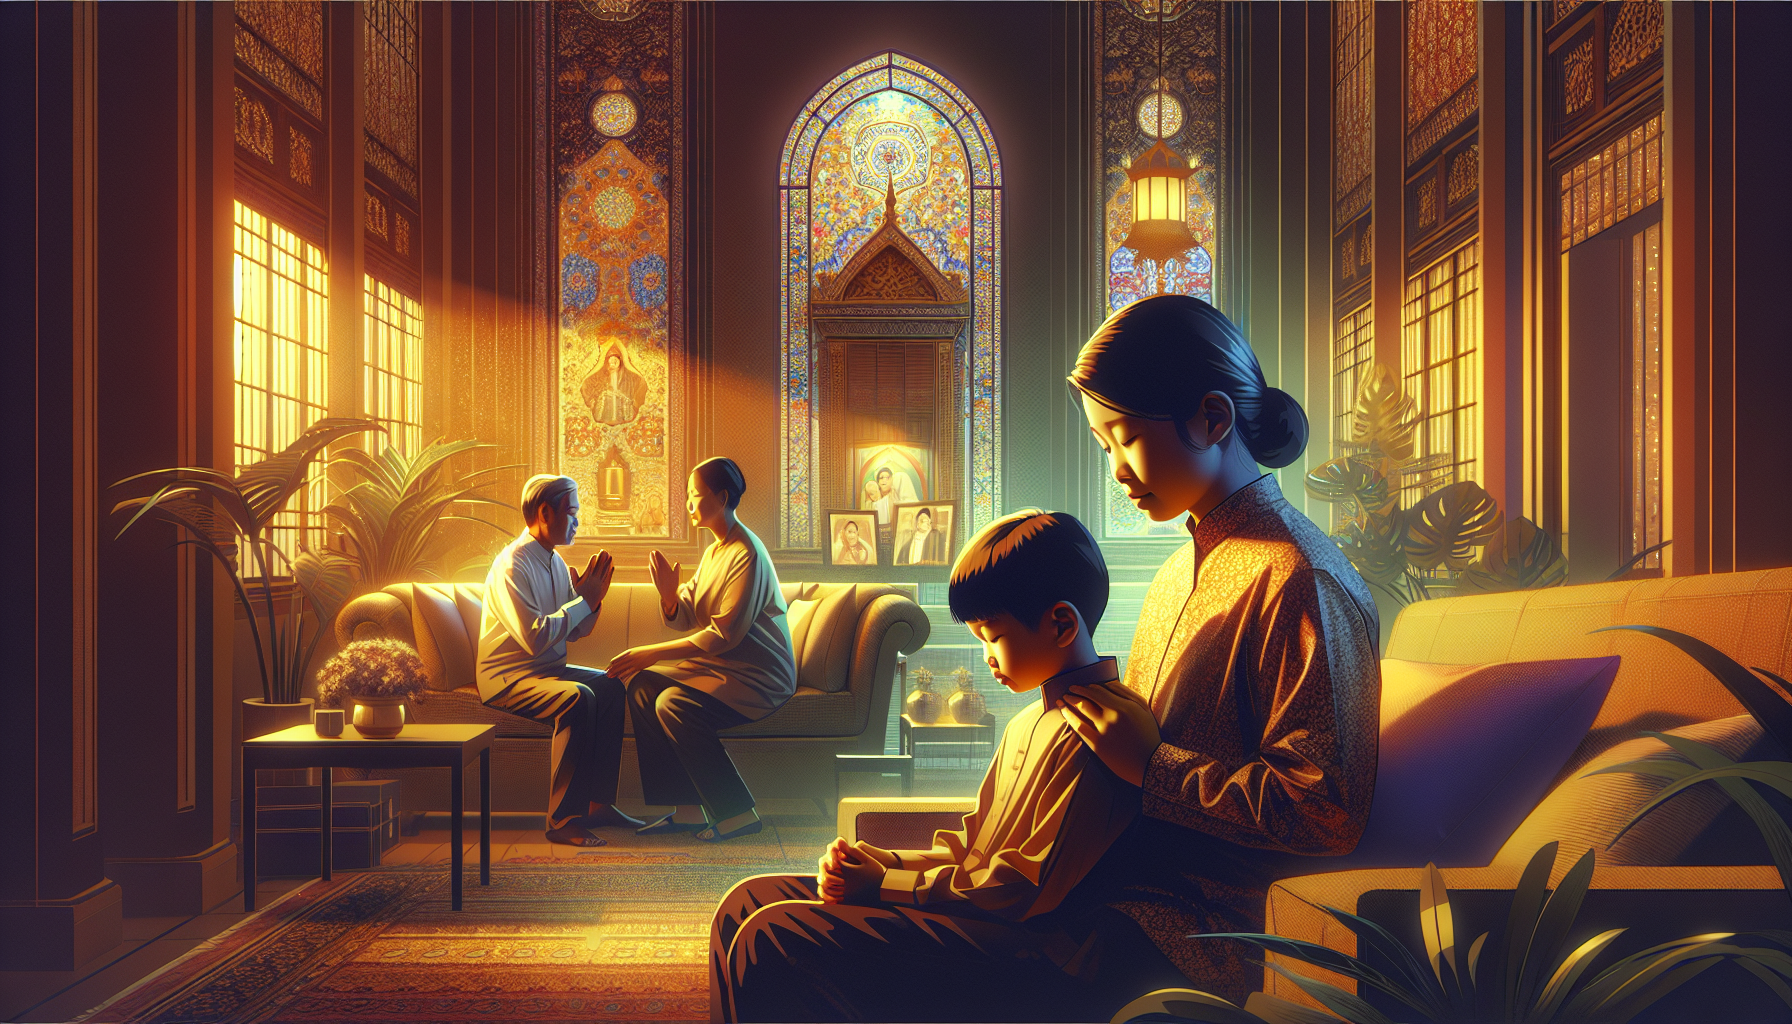 Create a warmly lit scene of a family gathered in a cozy living room. A parent has their hands gently placed on their child's shoulders, eyes closed in prayer, with a serene and loving expression. The